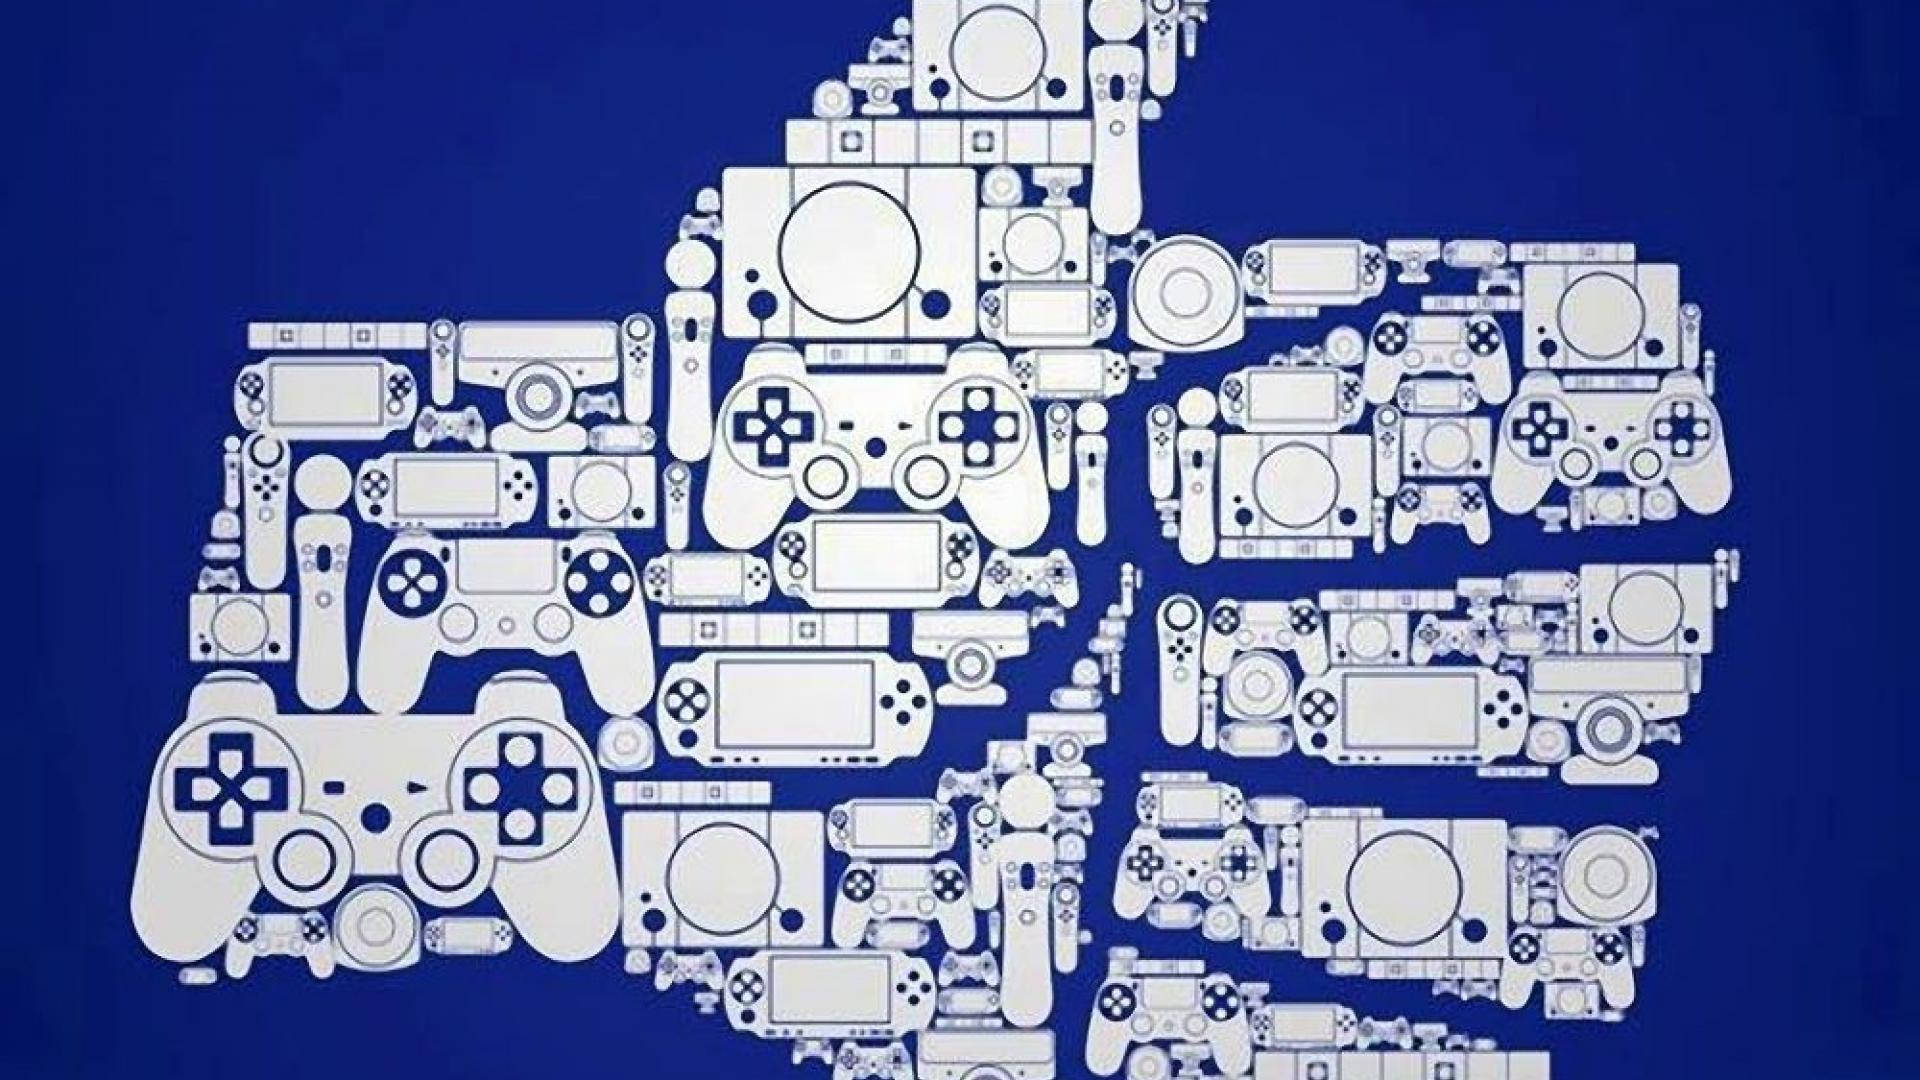 Sony Playstation Up the Game Wallpaper